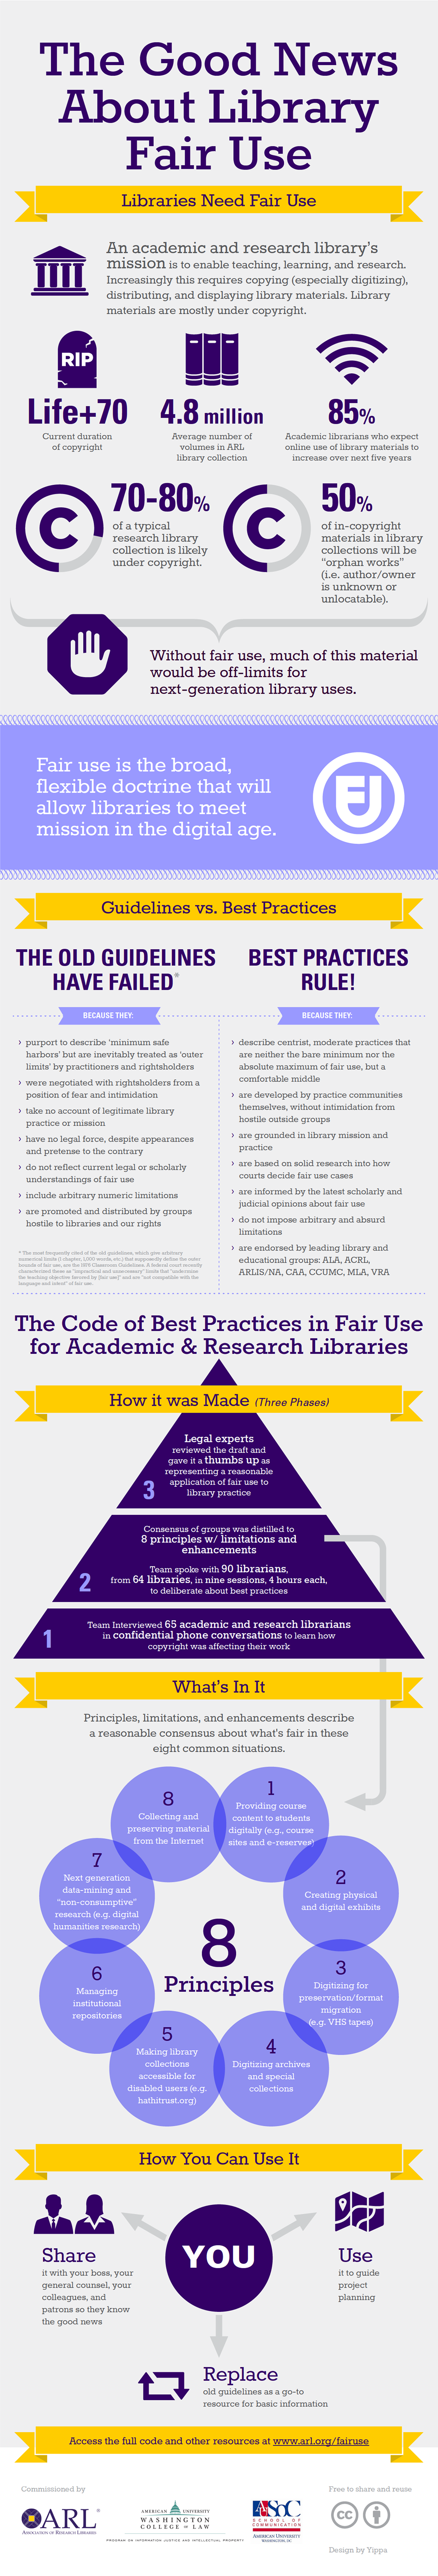 Infographic: The Good News About Library Fair Use